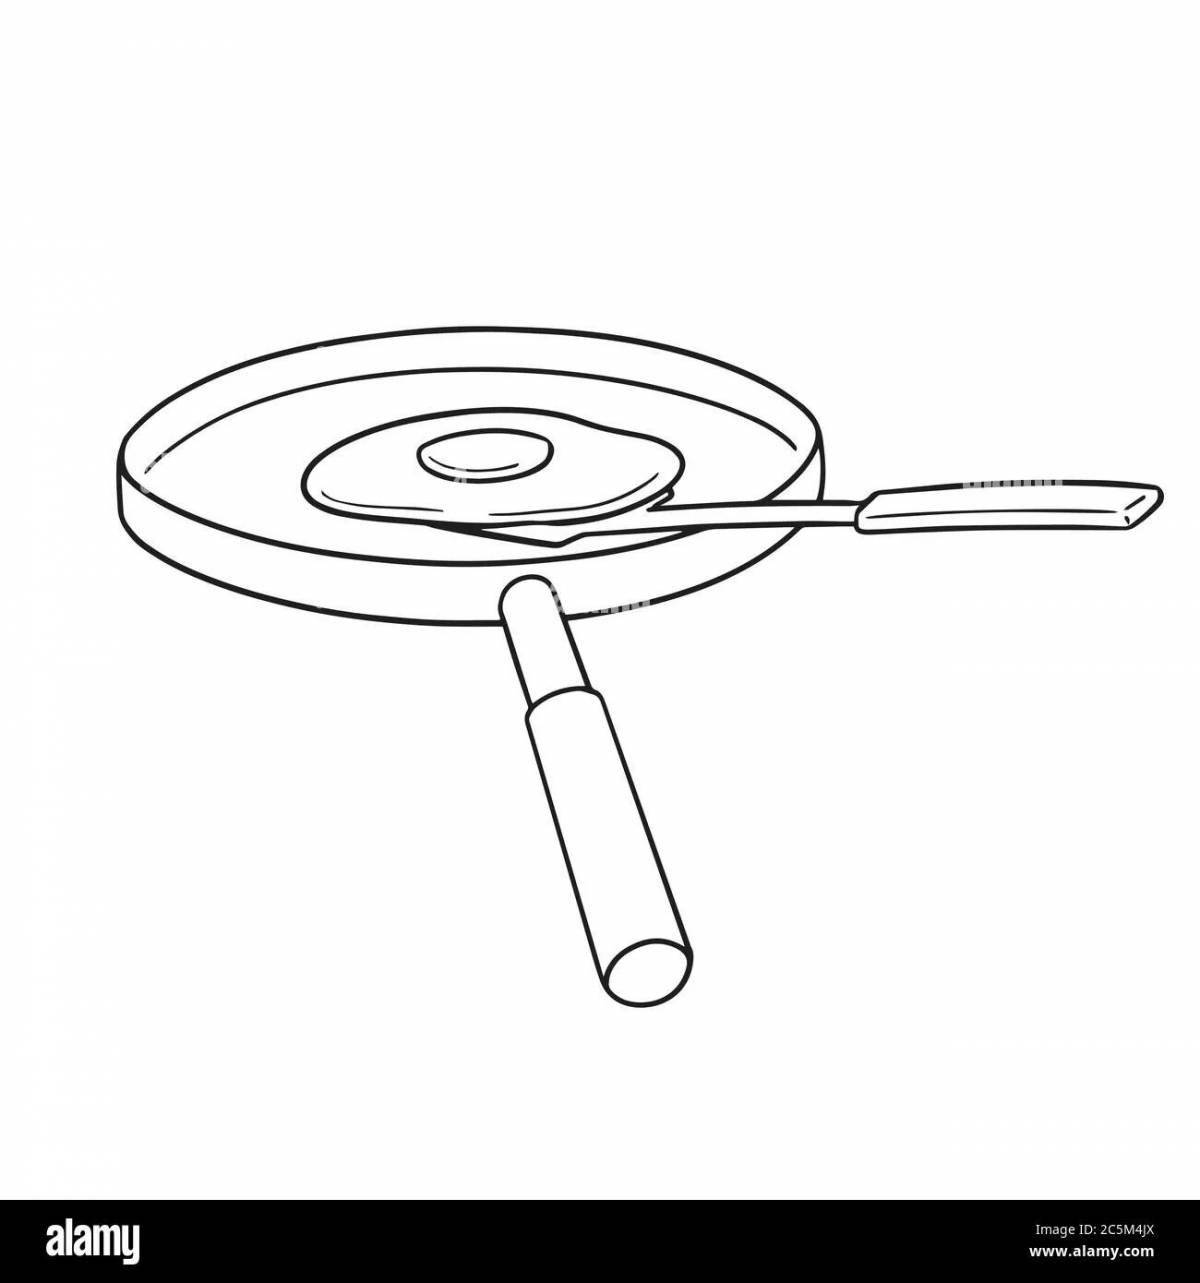 Innovative frying pan coloring book for 3-4 year olds